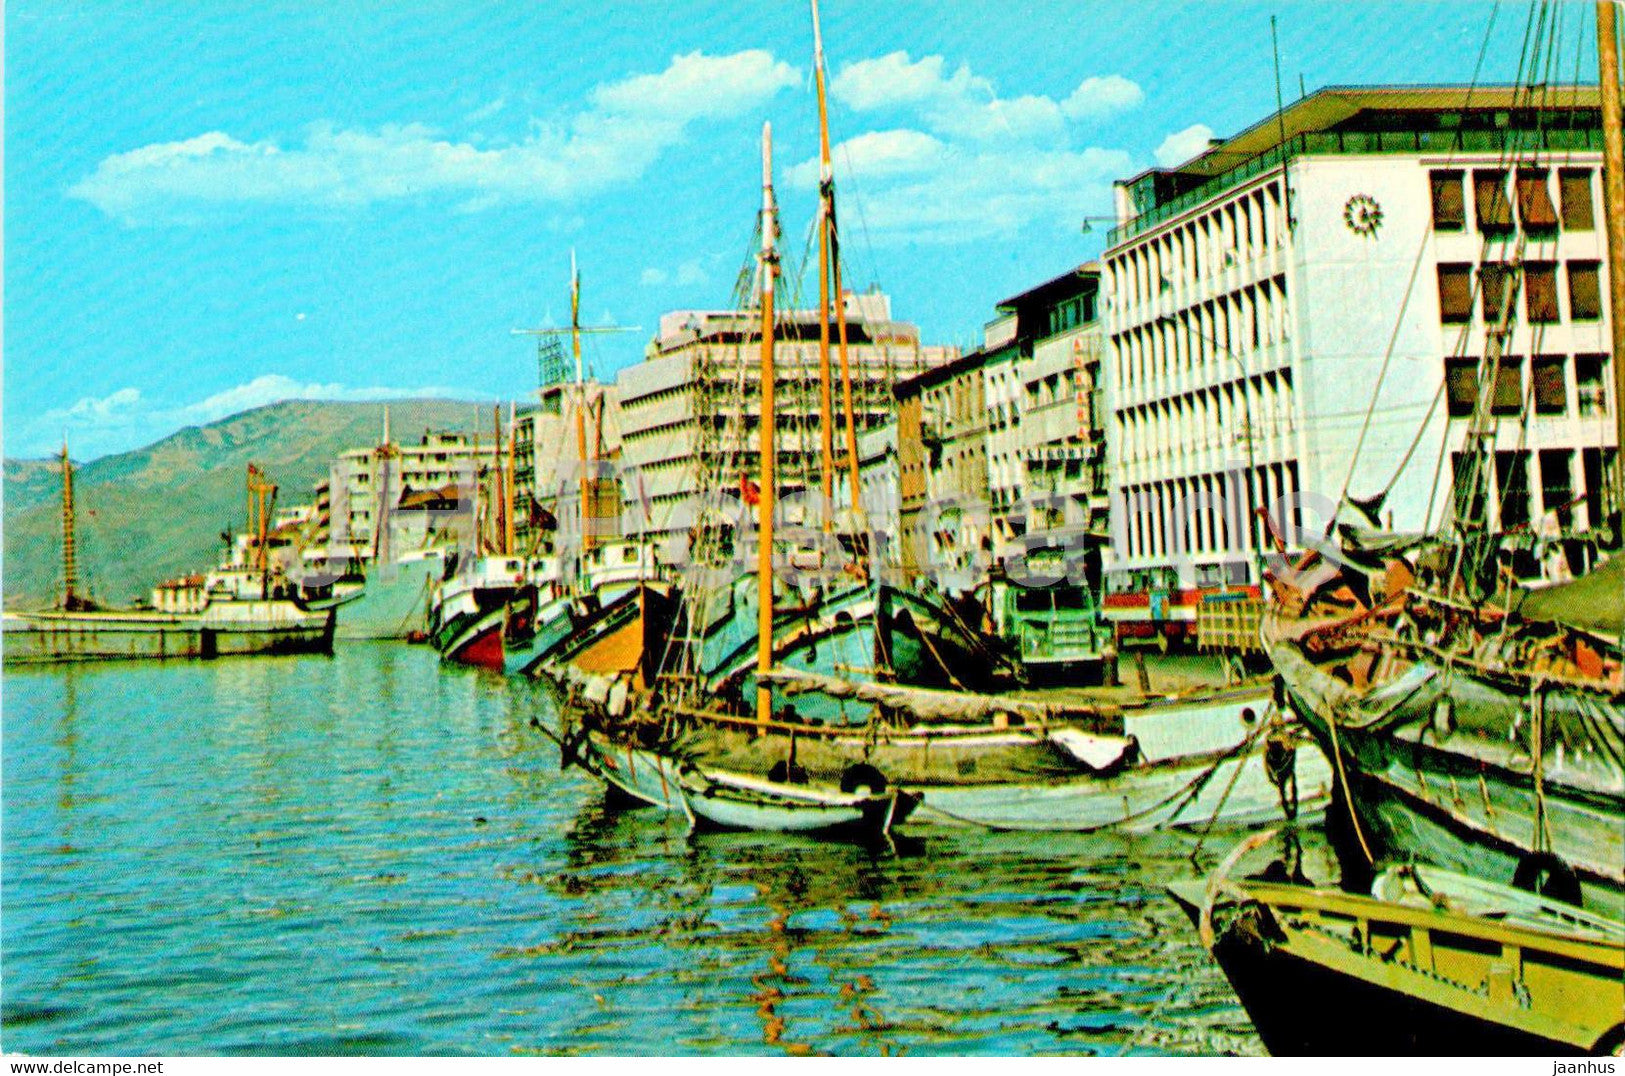 Izmir - A view of the harbour - port - boat - ship - Turkey - unused - JH Postcards